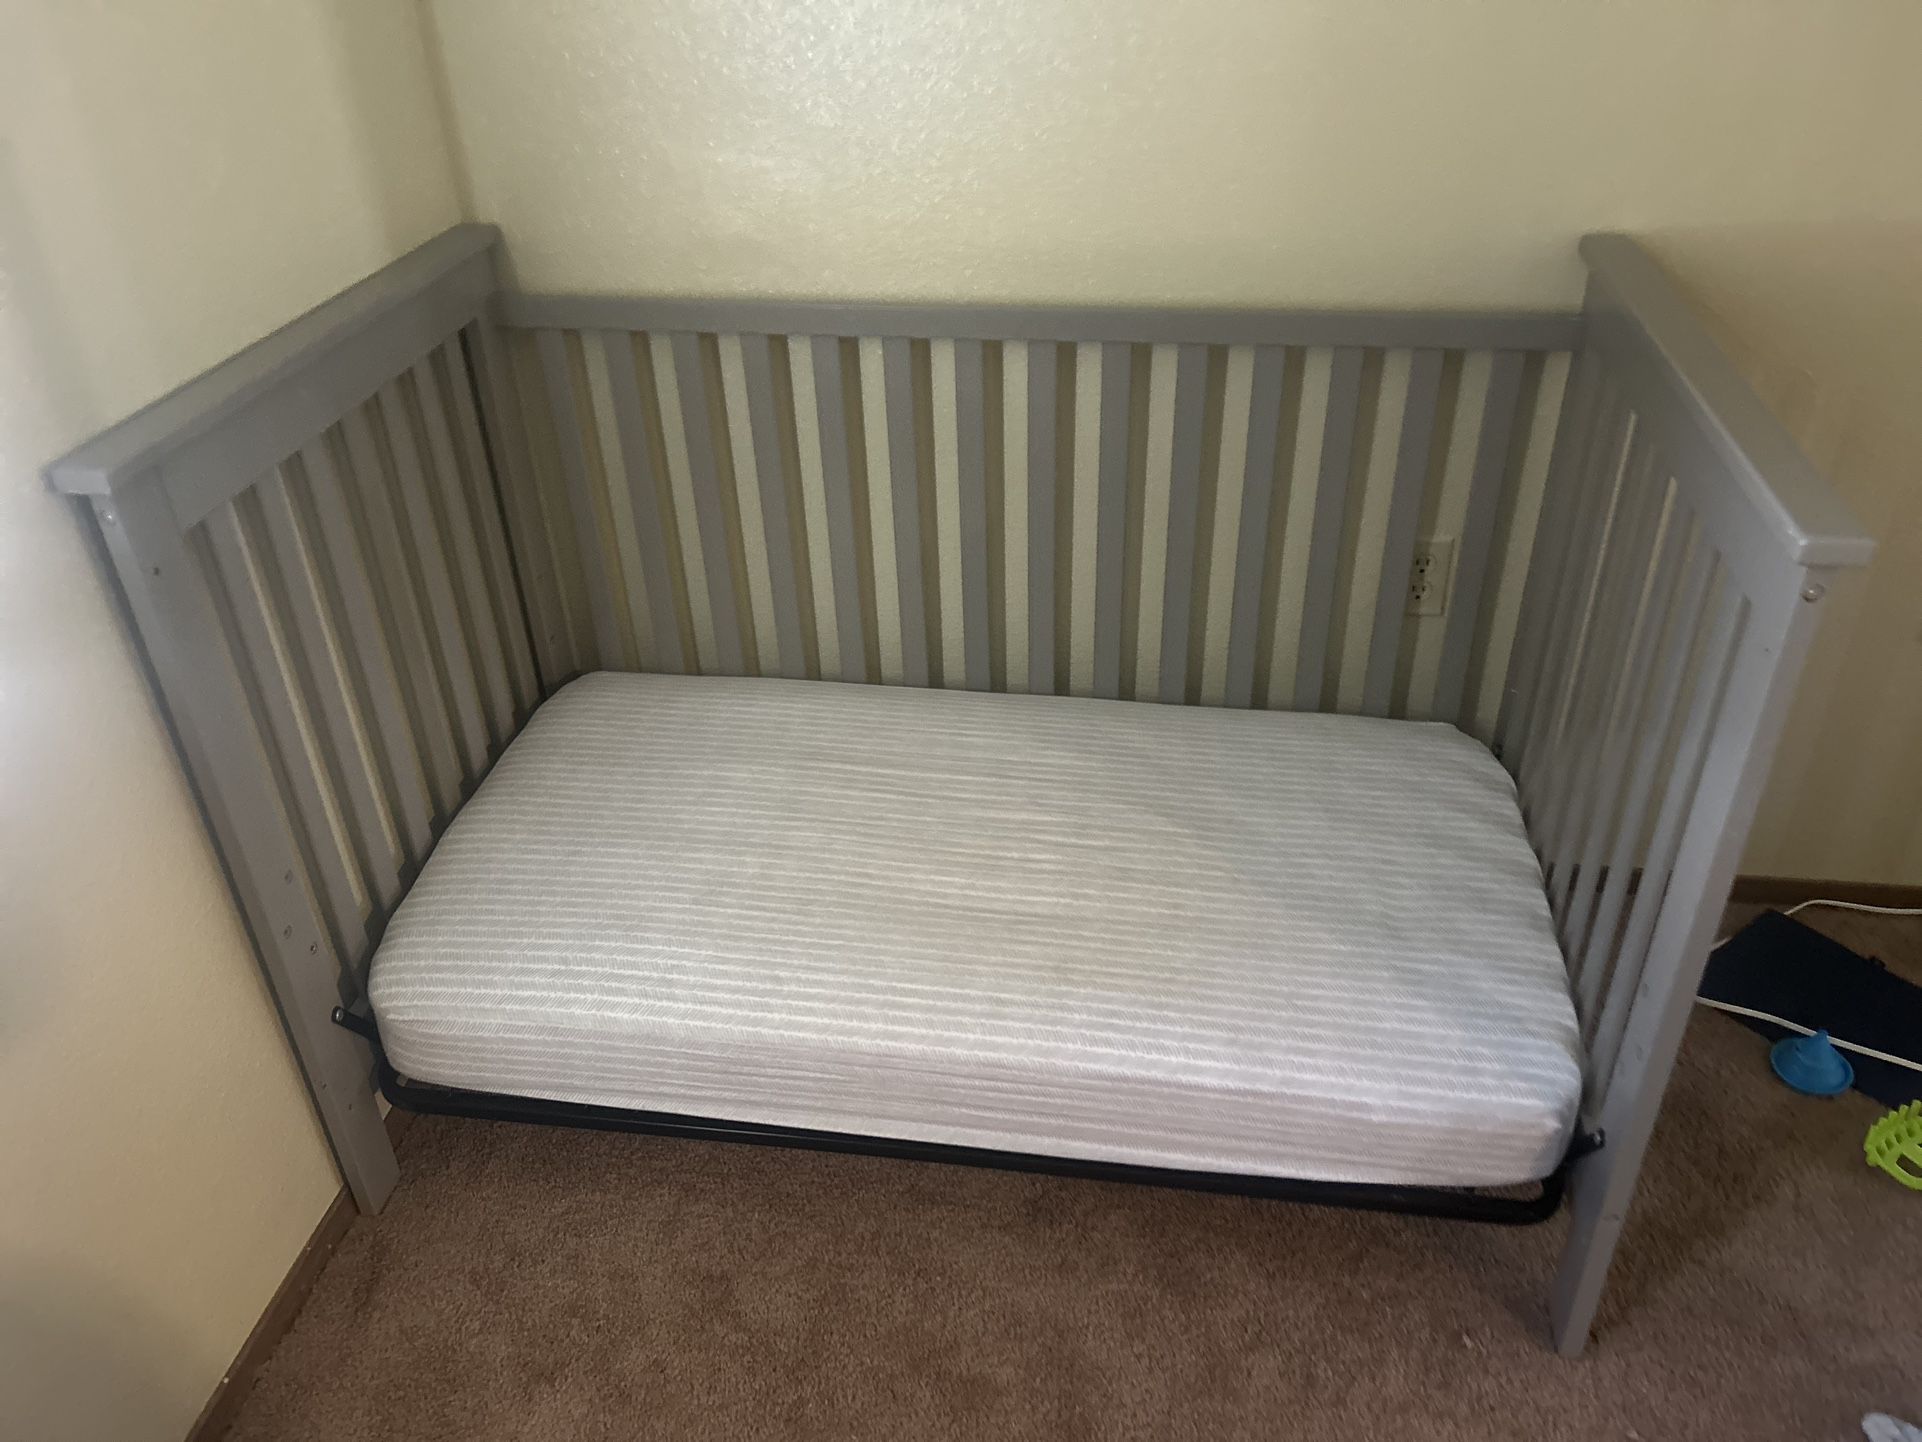 Two Cribs For Sale 